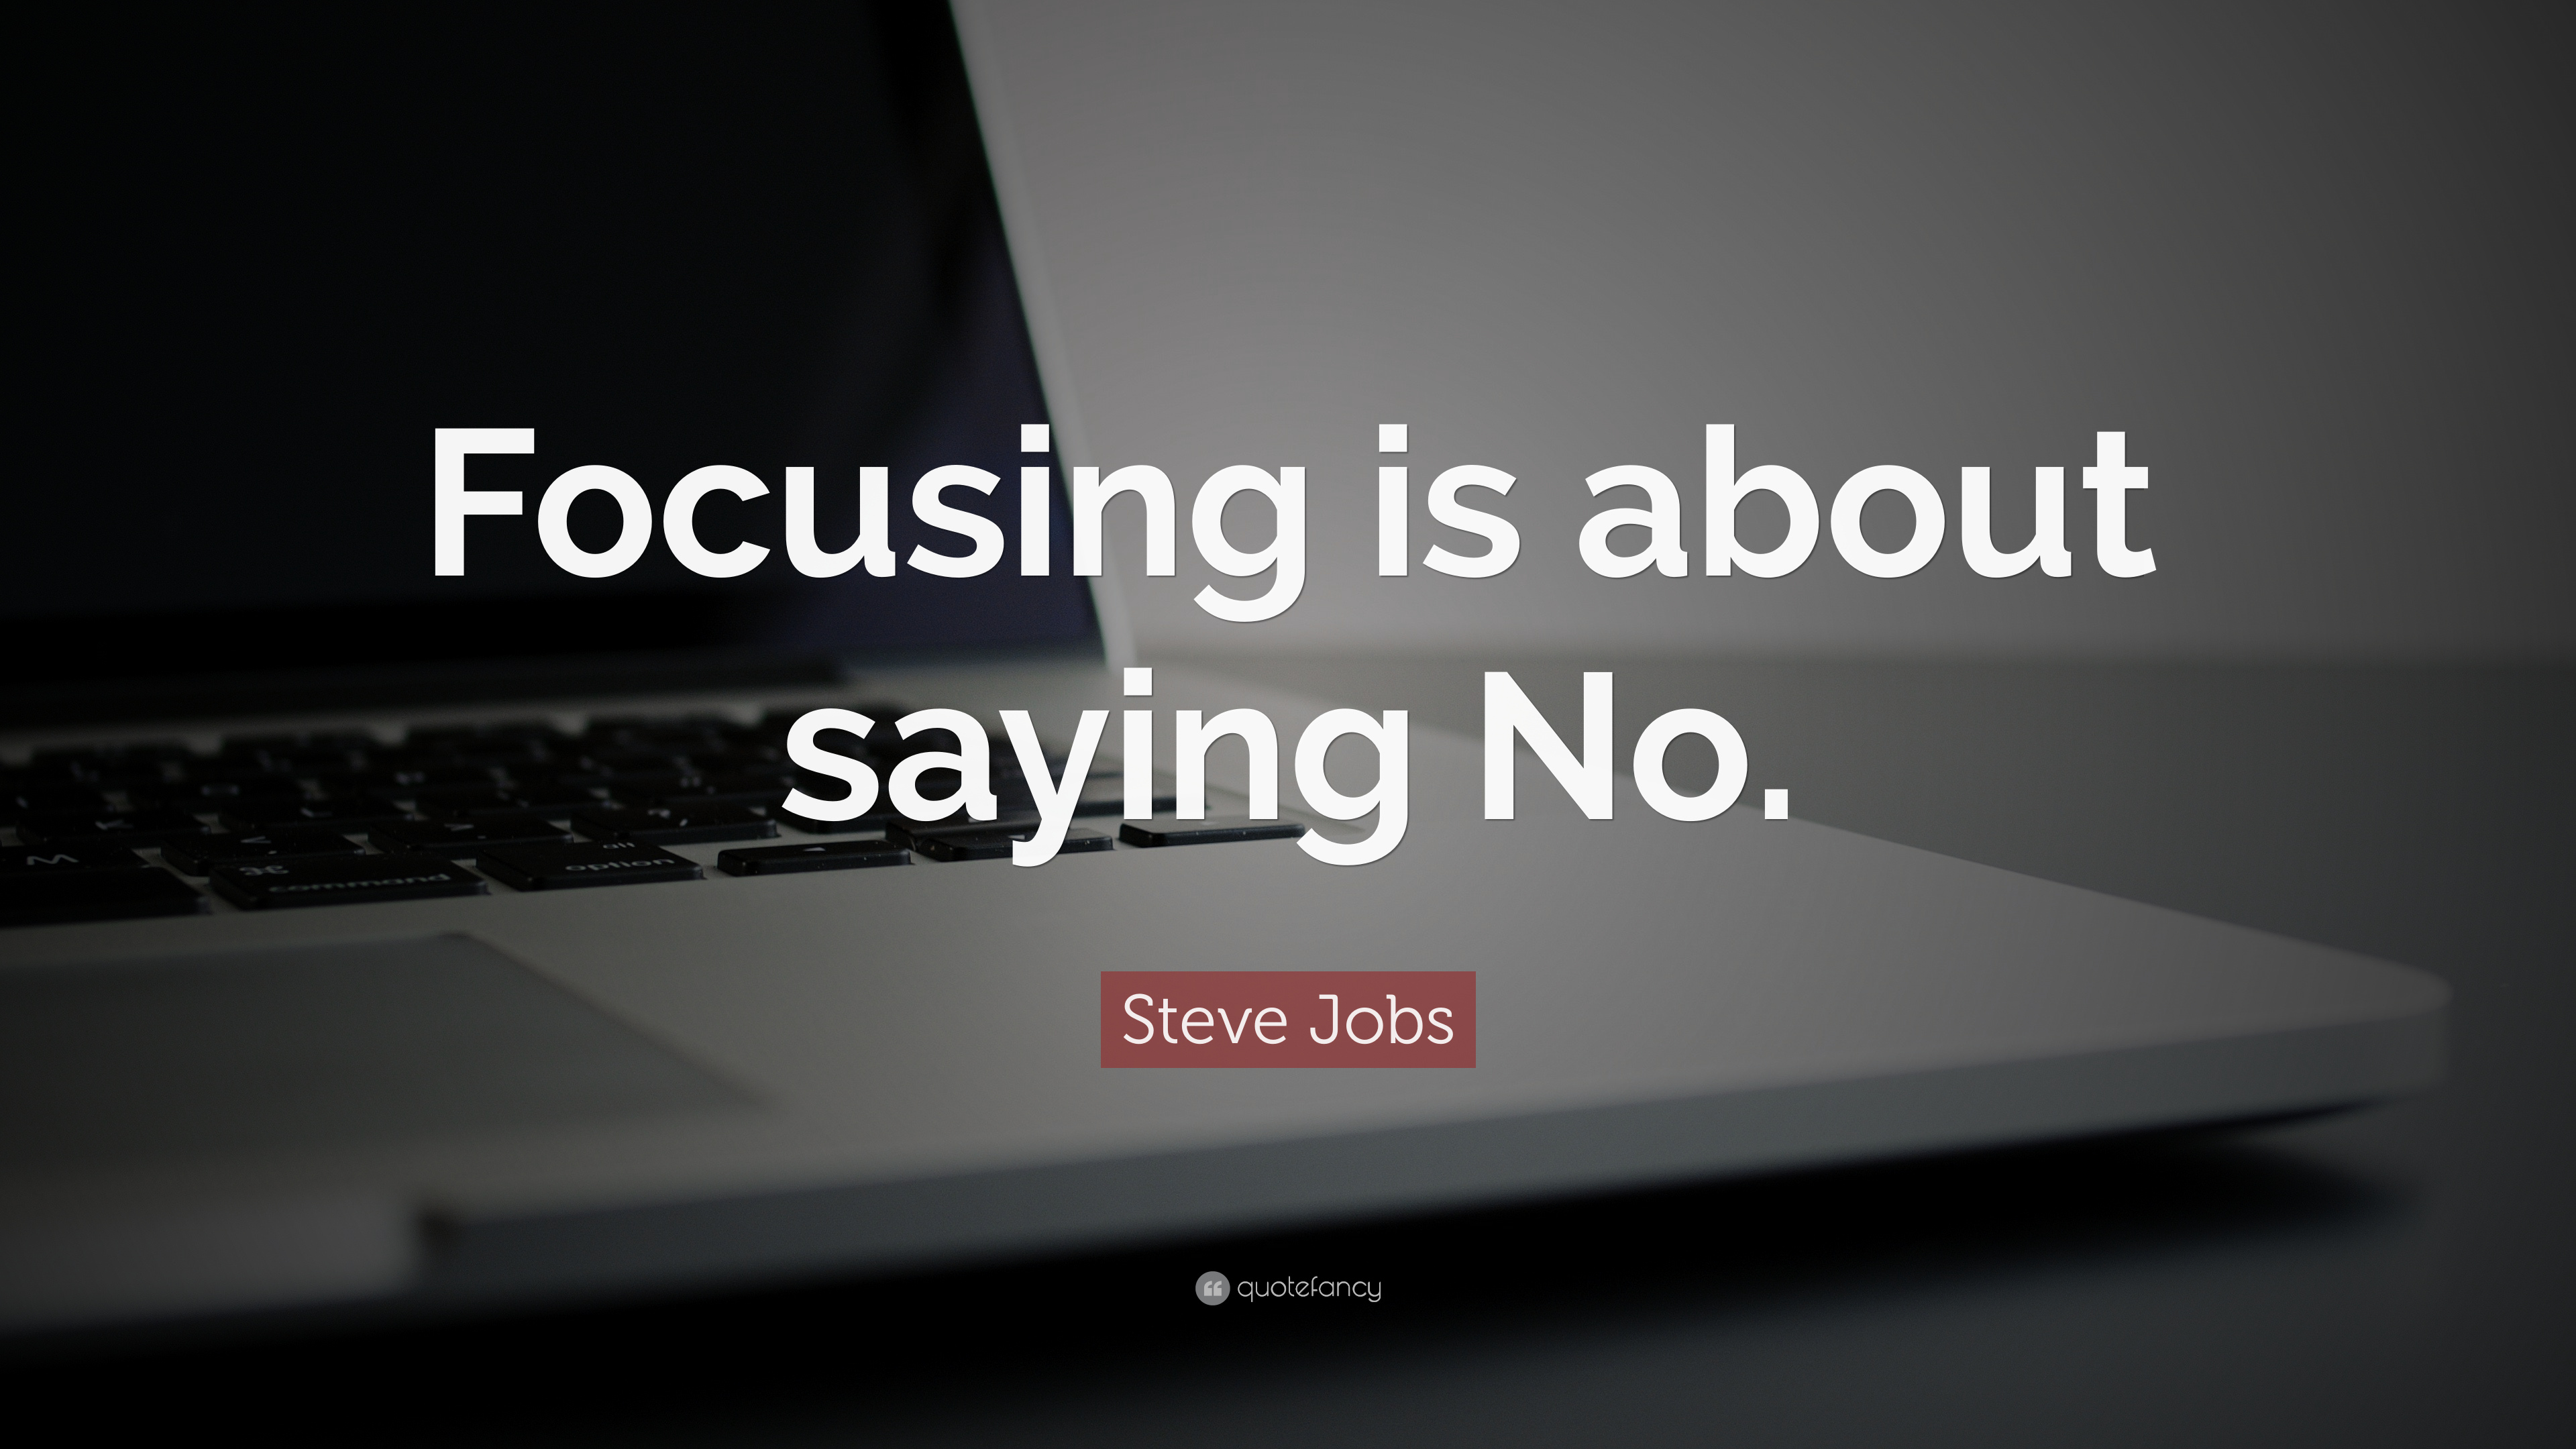 Steve Jobs Quote: “Focusing is about saying No.” 20 wallpaper